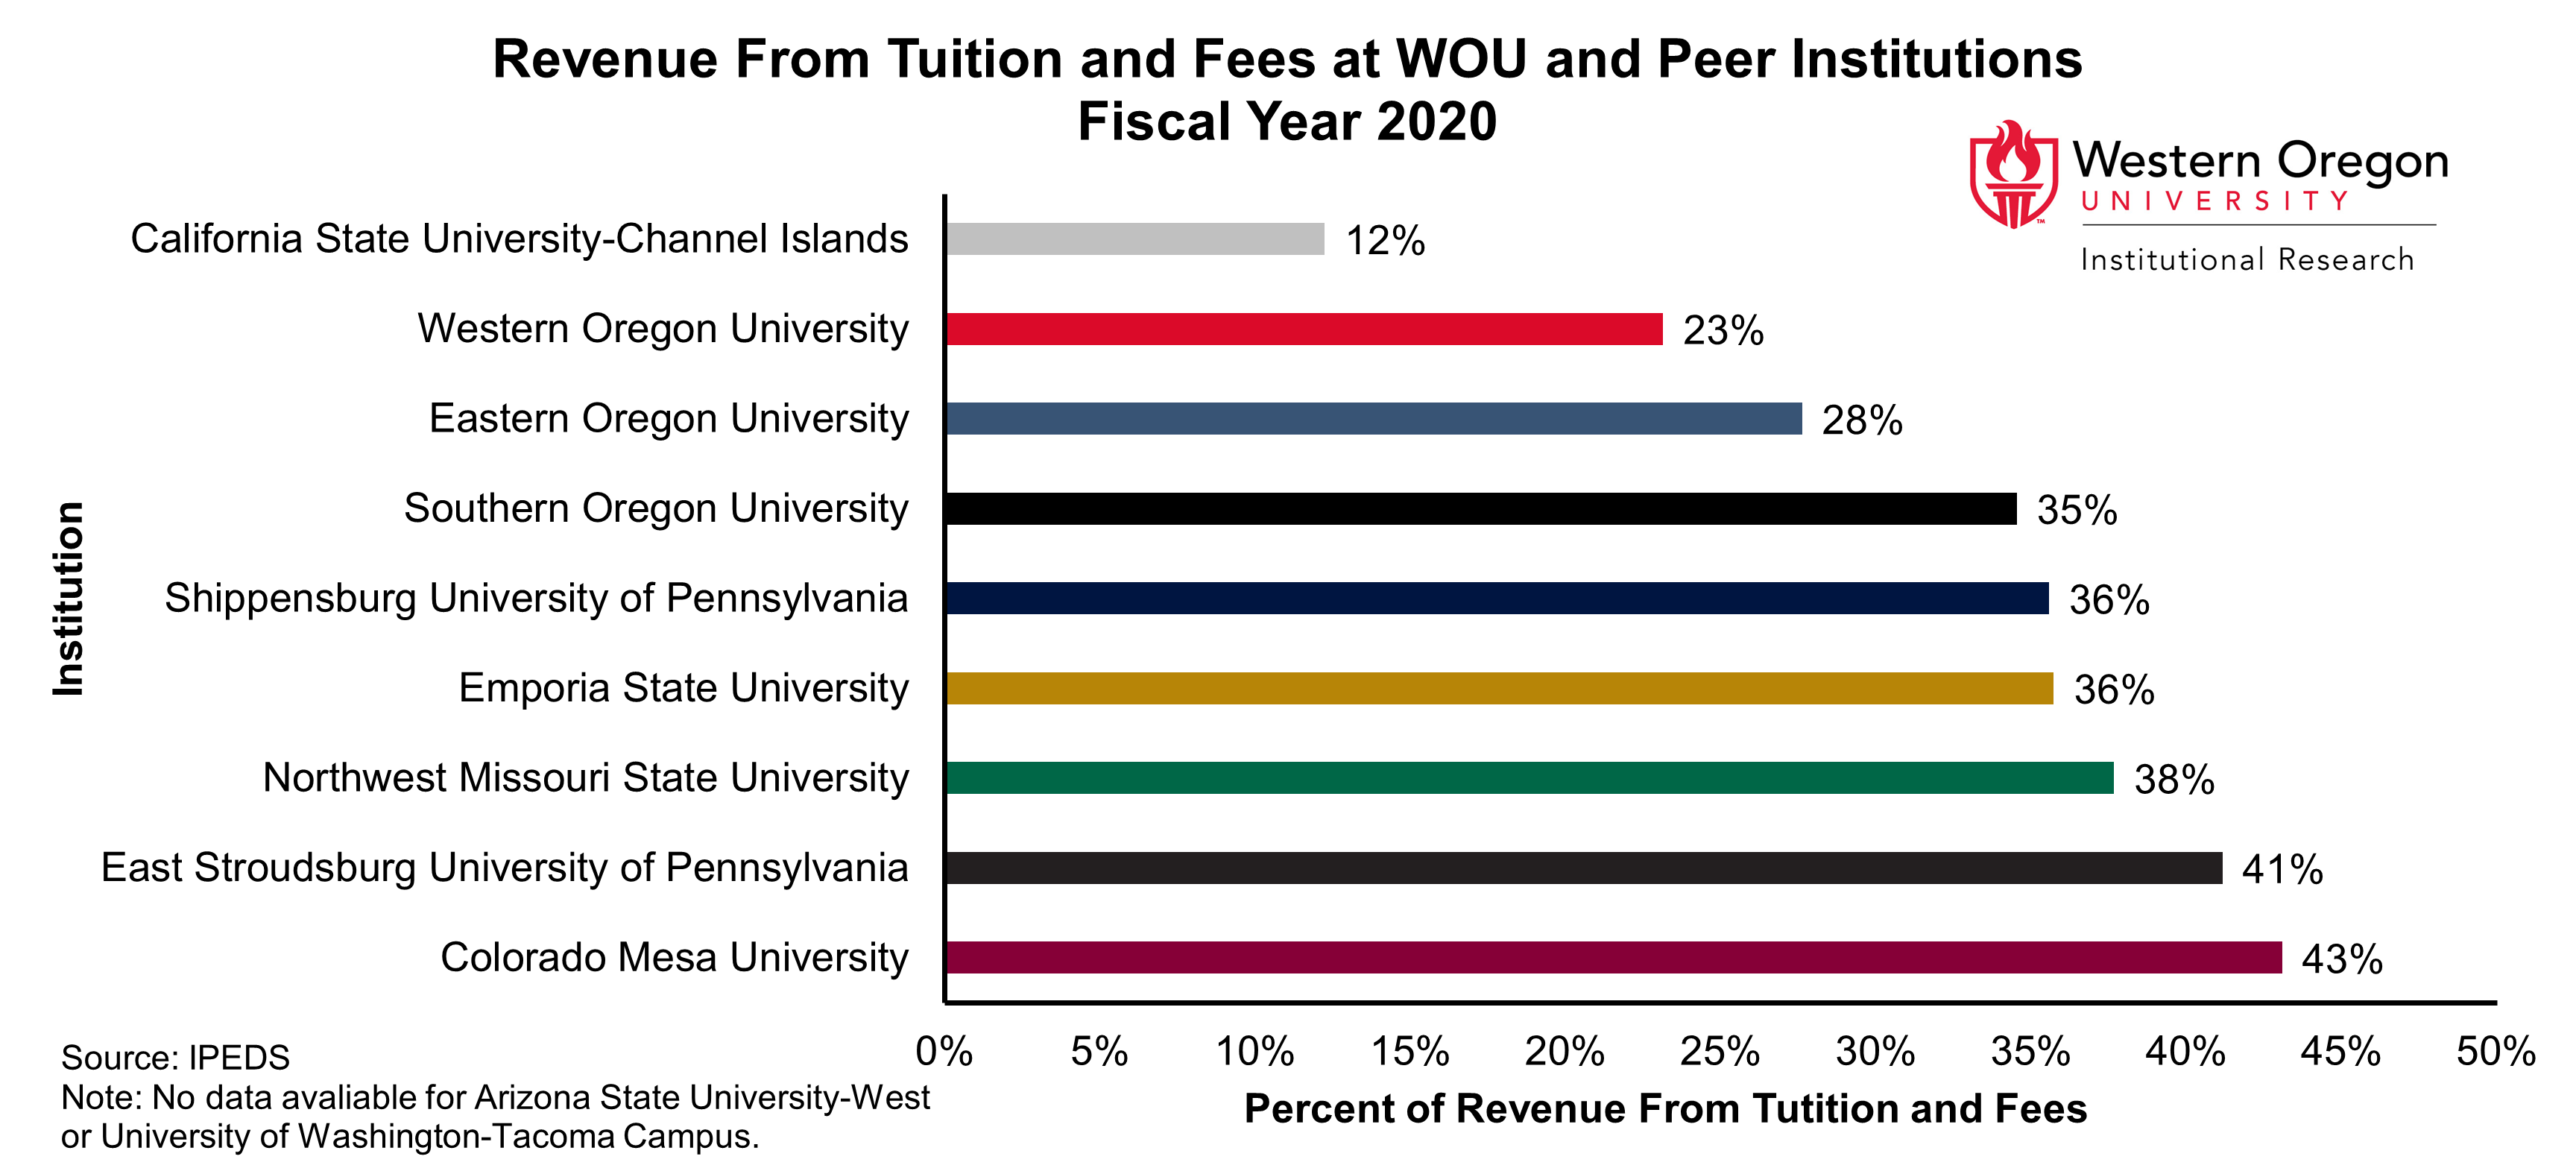 Bar graph of the percentage of revenue from tuition and fees for WOU and peer universities in 2020, showing percentages that range from 12% to 43% with WOU's percentage falling near the minimum